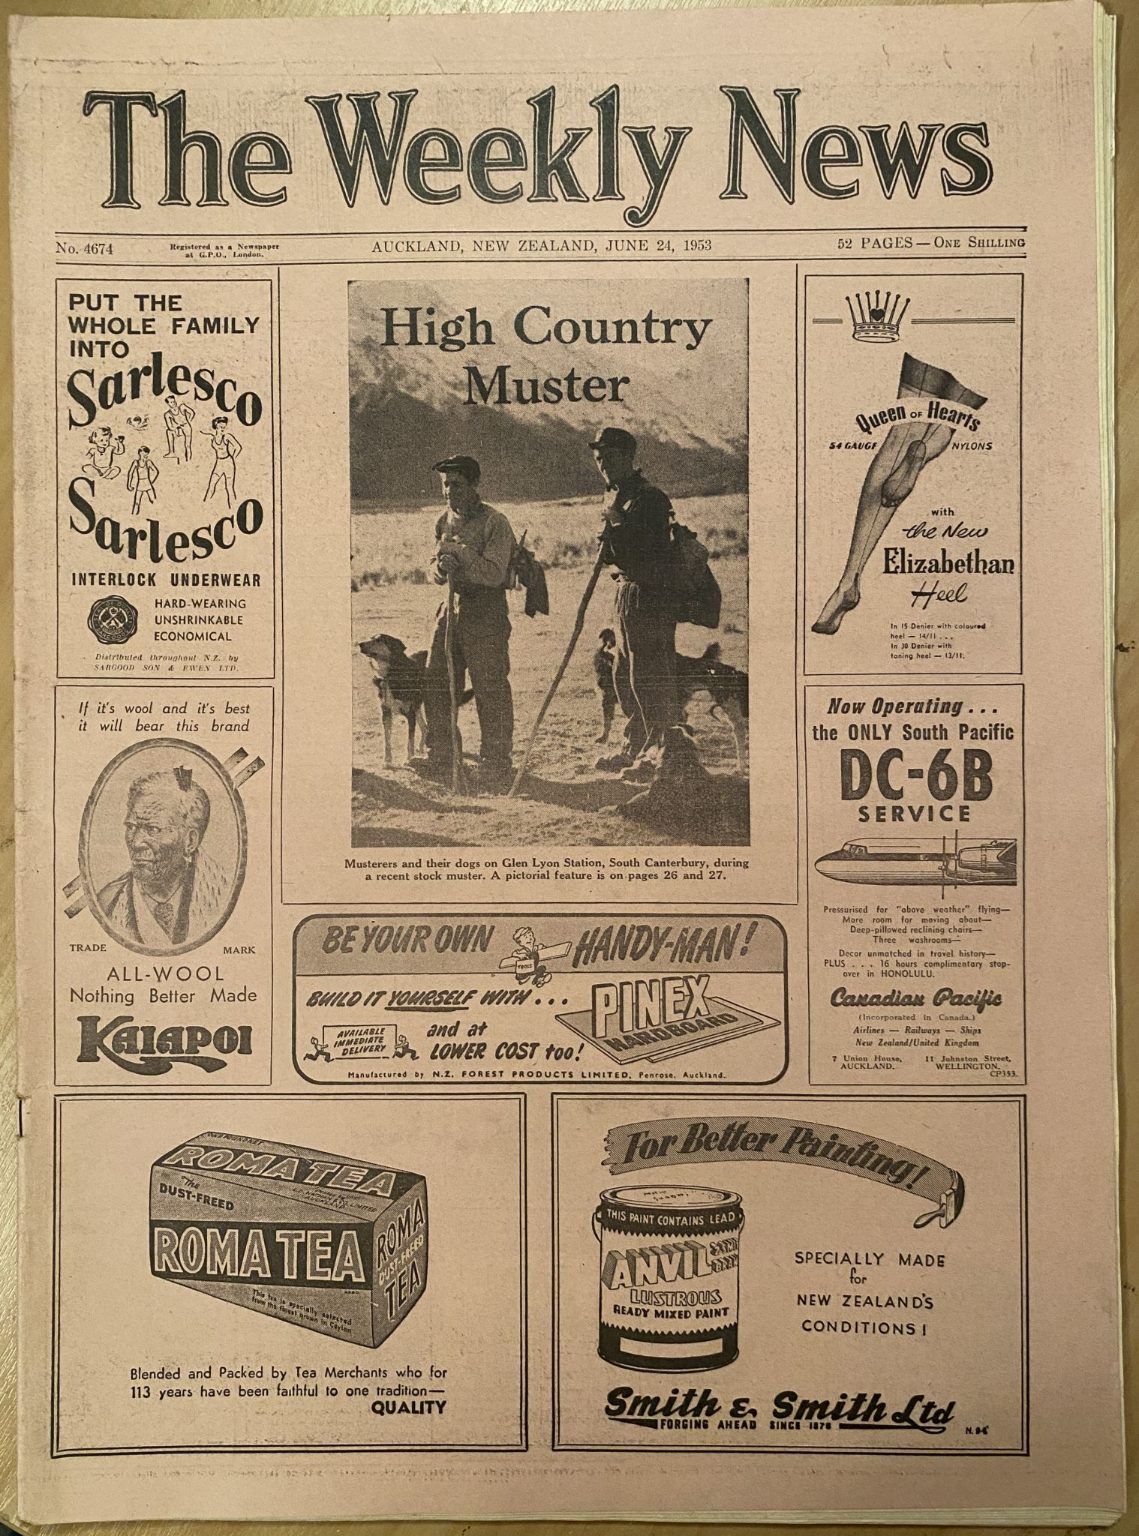 OLD NEWSPAPER: The Weekly News - No. 4674, 24 June 1953